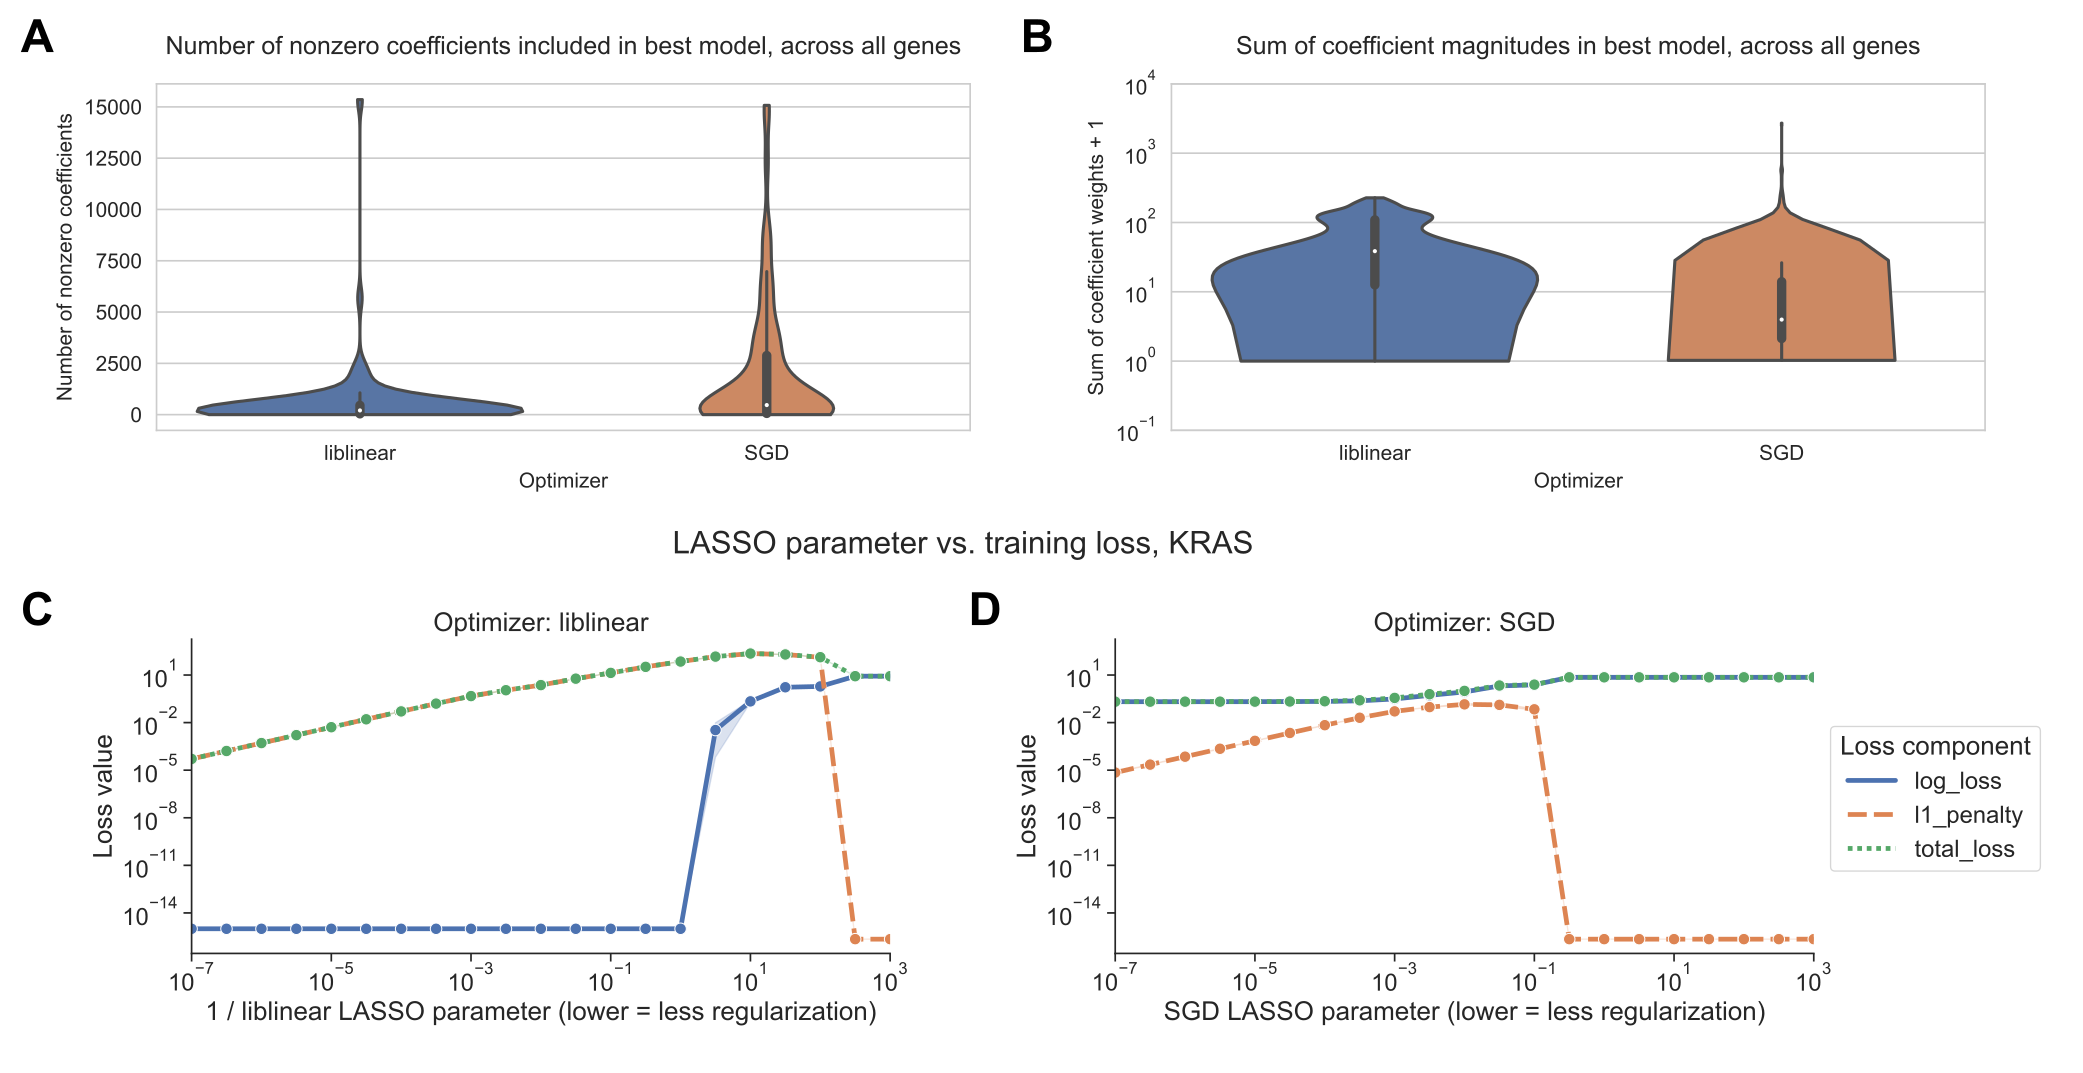 Figure 3: A. Distribution across genes of the number of nonzero coefficients included in best-performing LASSO logistic regression models. Violin plot density estimations are clipped at the ends of the observed data range, and boxes show the median/IQR. B. Distribution across genes of the sum of model coefficient weights for best-performing LASSO logistic regression models. C. Decomposition of loss function for models fit using liblinear across regularization levels. 0 values on the y-axis are rounded up to machine epsilon; i.e. 2.22 x 10-16. D. Decomposition of loss function for models fit using SGD across regularization levels. 0 values on the y-axis are rounded up to machine epsilon; i.e. 2.22 x 10-16.